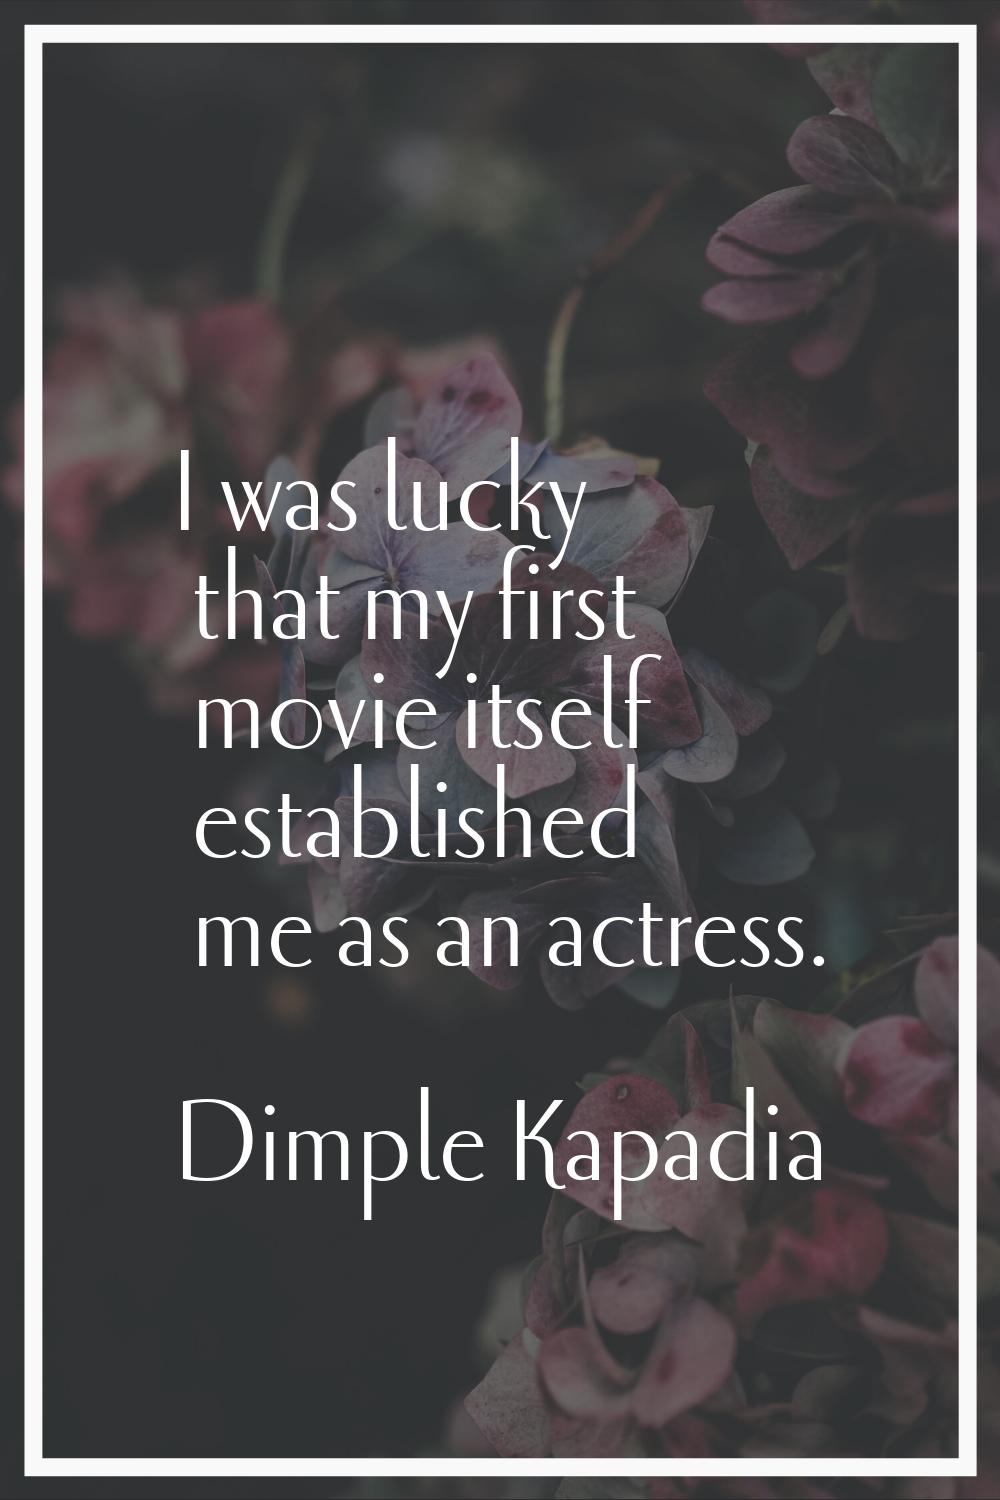 I was lucky that my first movie itself established me as an actress.